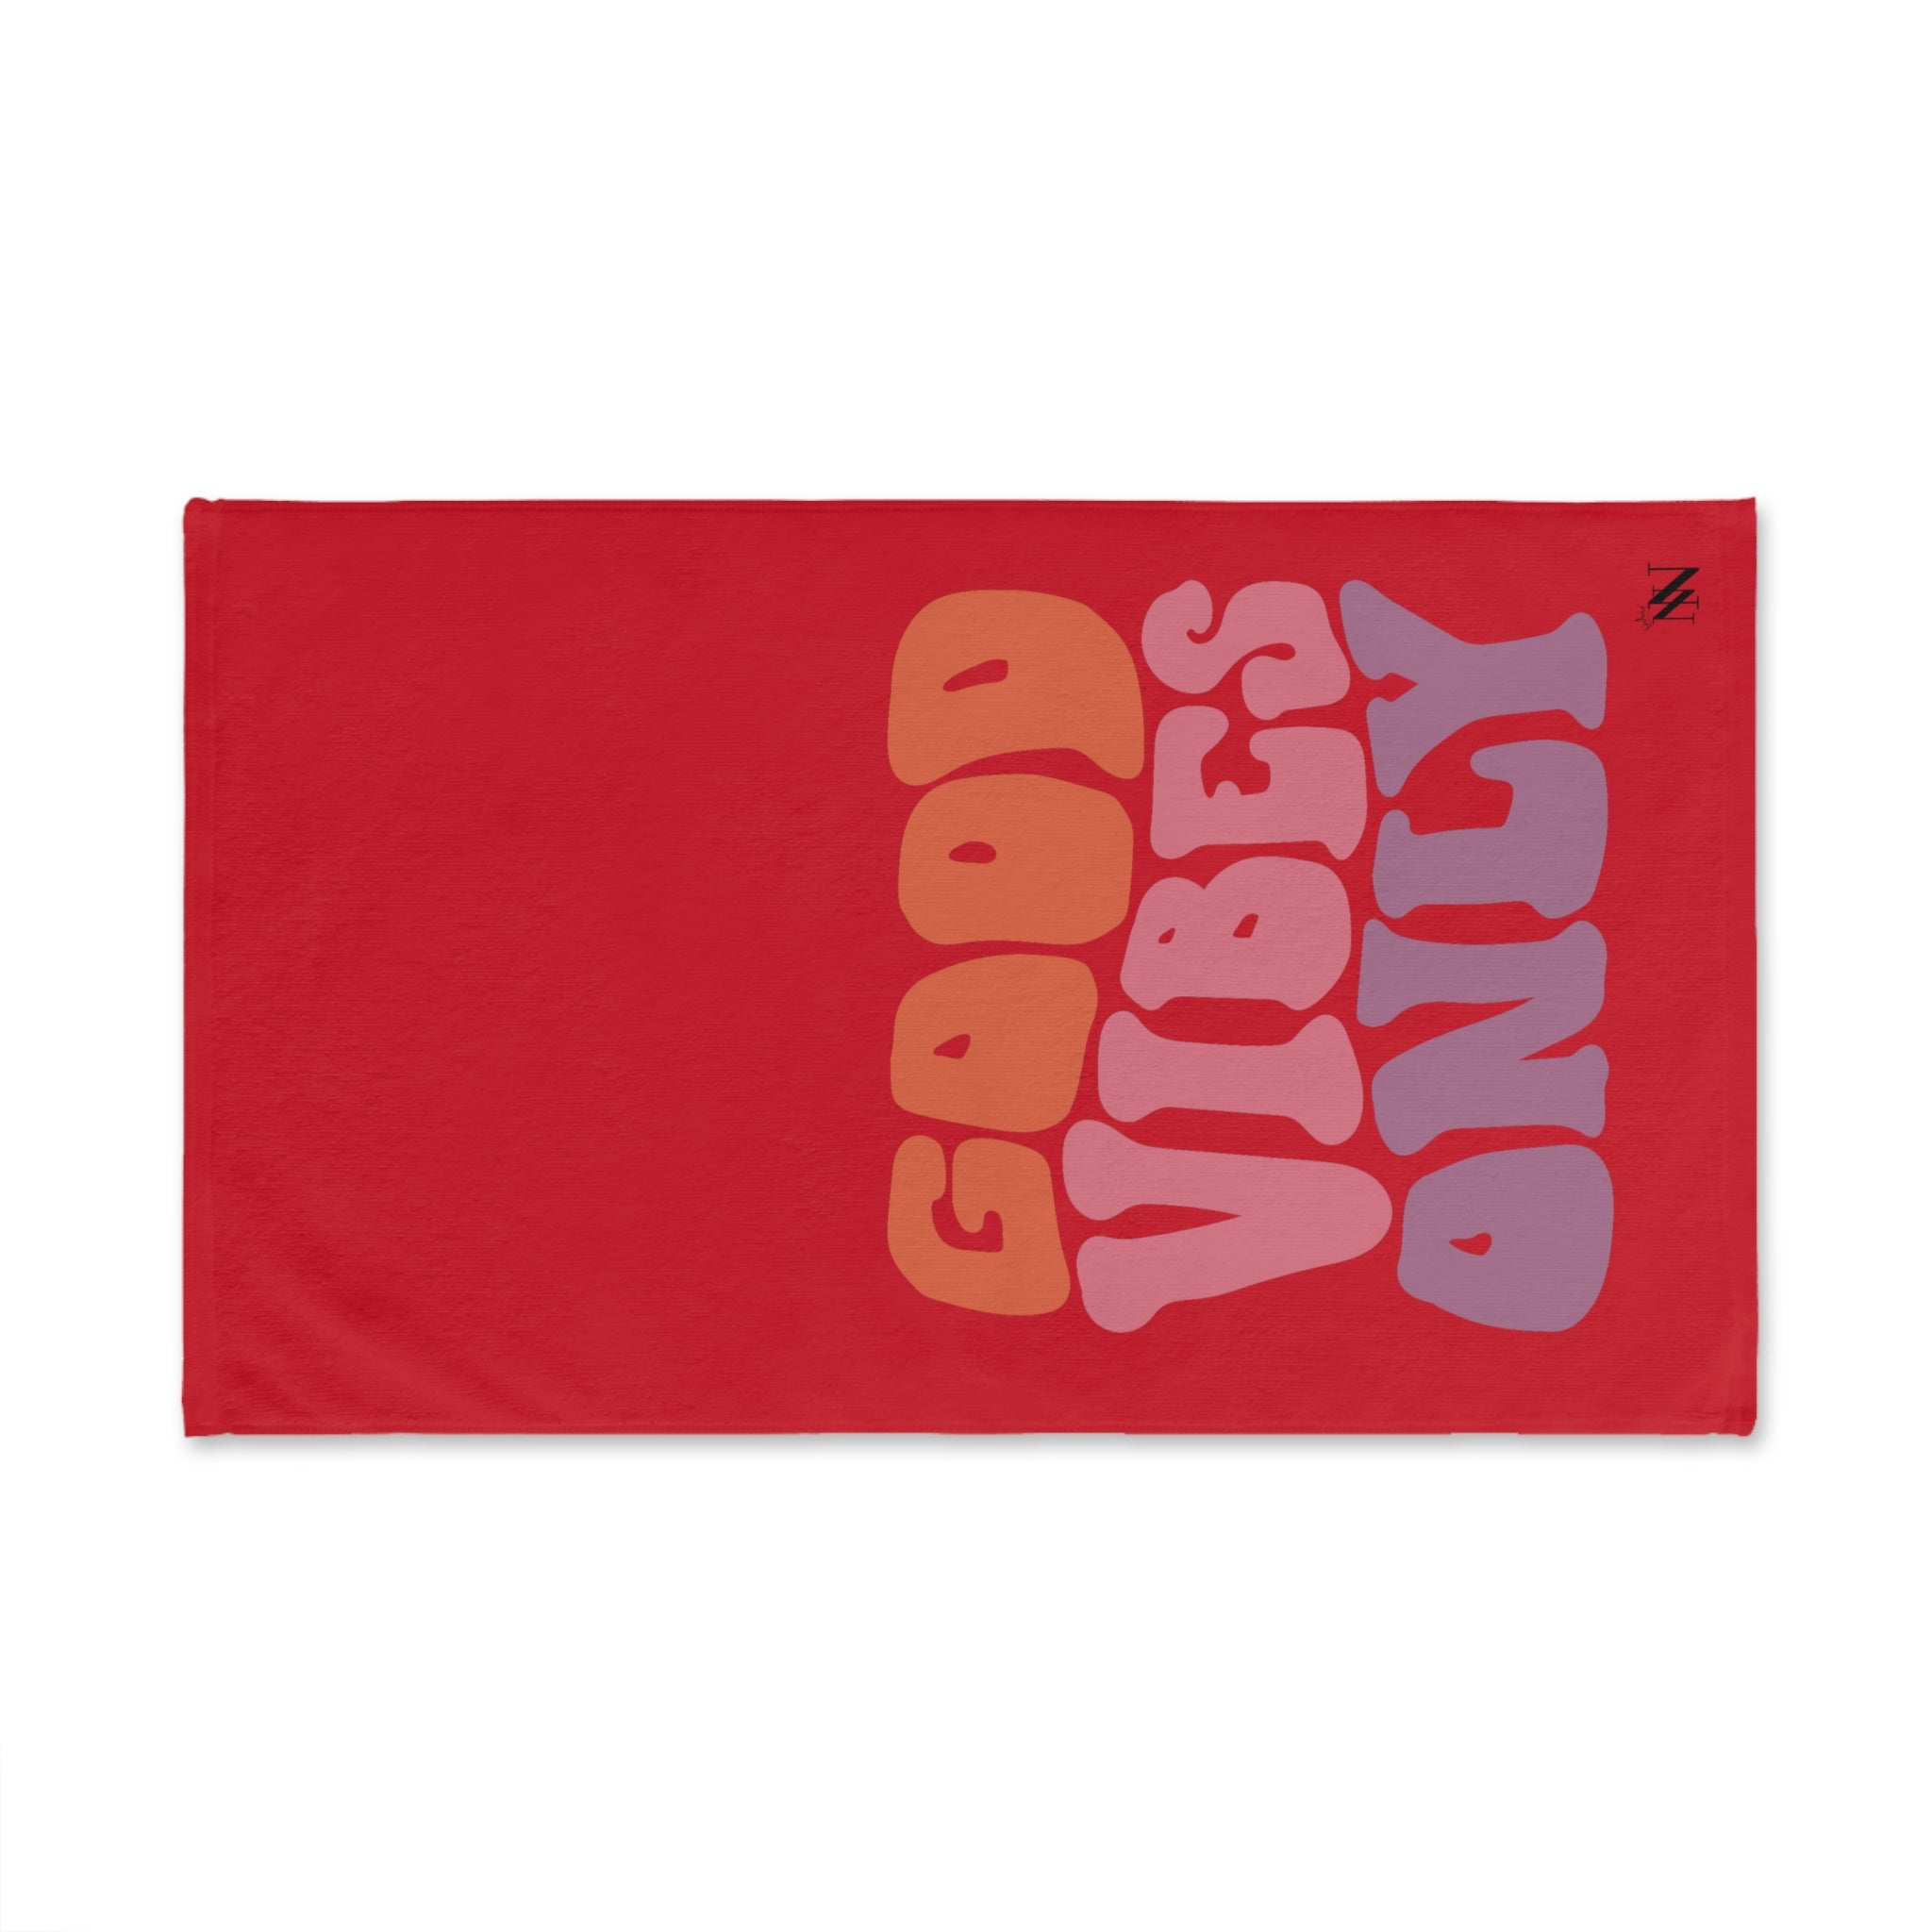 Only Vibes Good Red | Sexy Gifts for Boyfriend, Funny Towel Romantic Gift for Wedding Couple Fiance First Year 2nd Anniversary Valentines, Party Gag Gifts, Joke Humor Cloth for Husband Men BF NECTAR NAPKINS